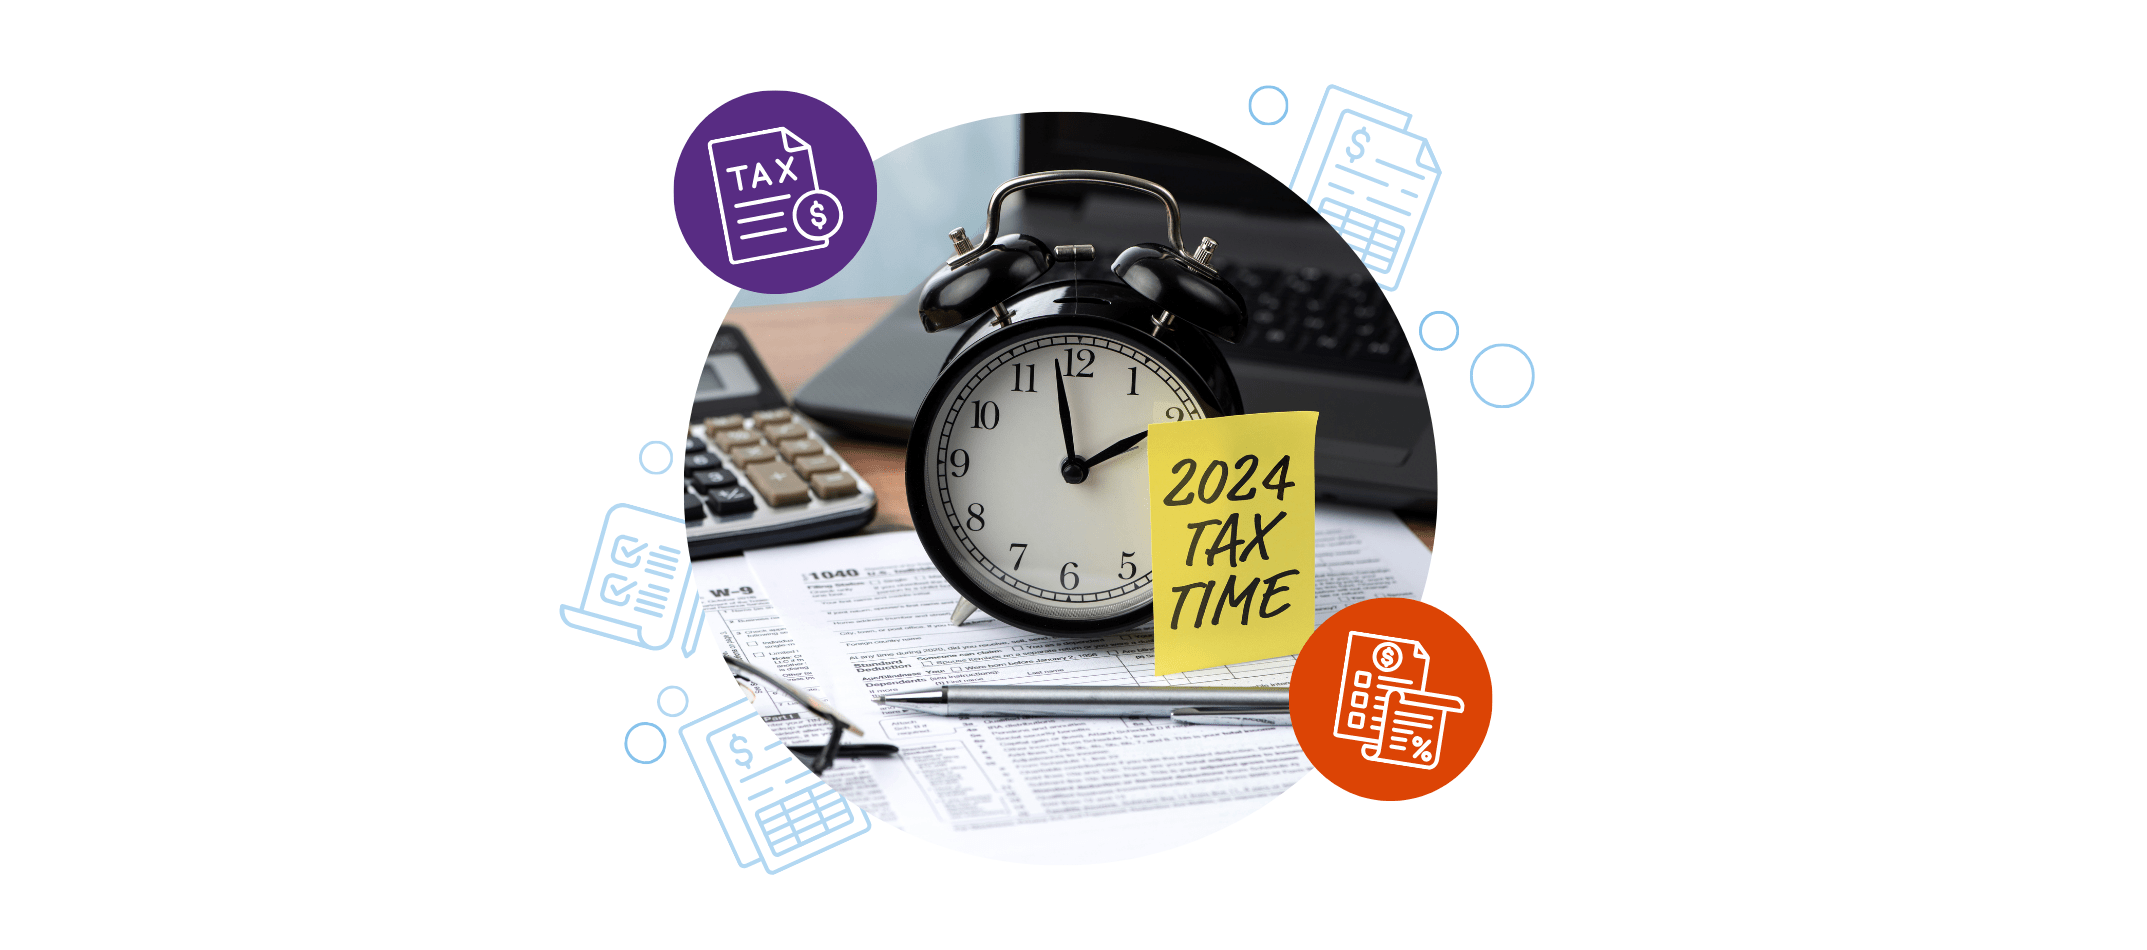 Tax Time Hints with ticking clock, sticky note about 2024 Tax Time and tax documents.